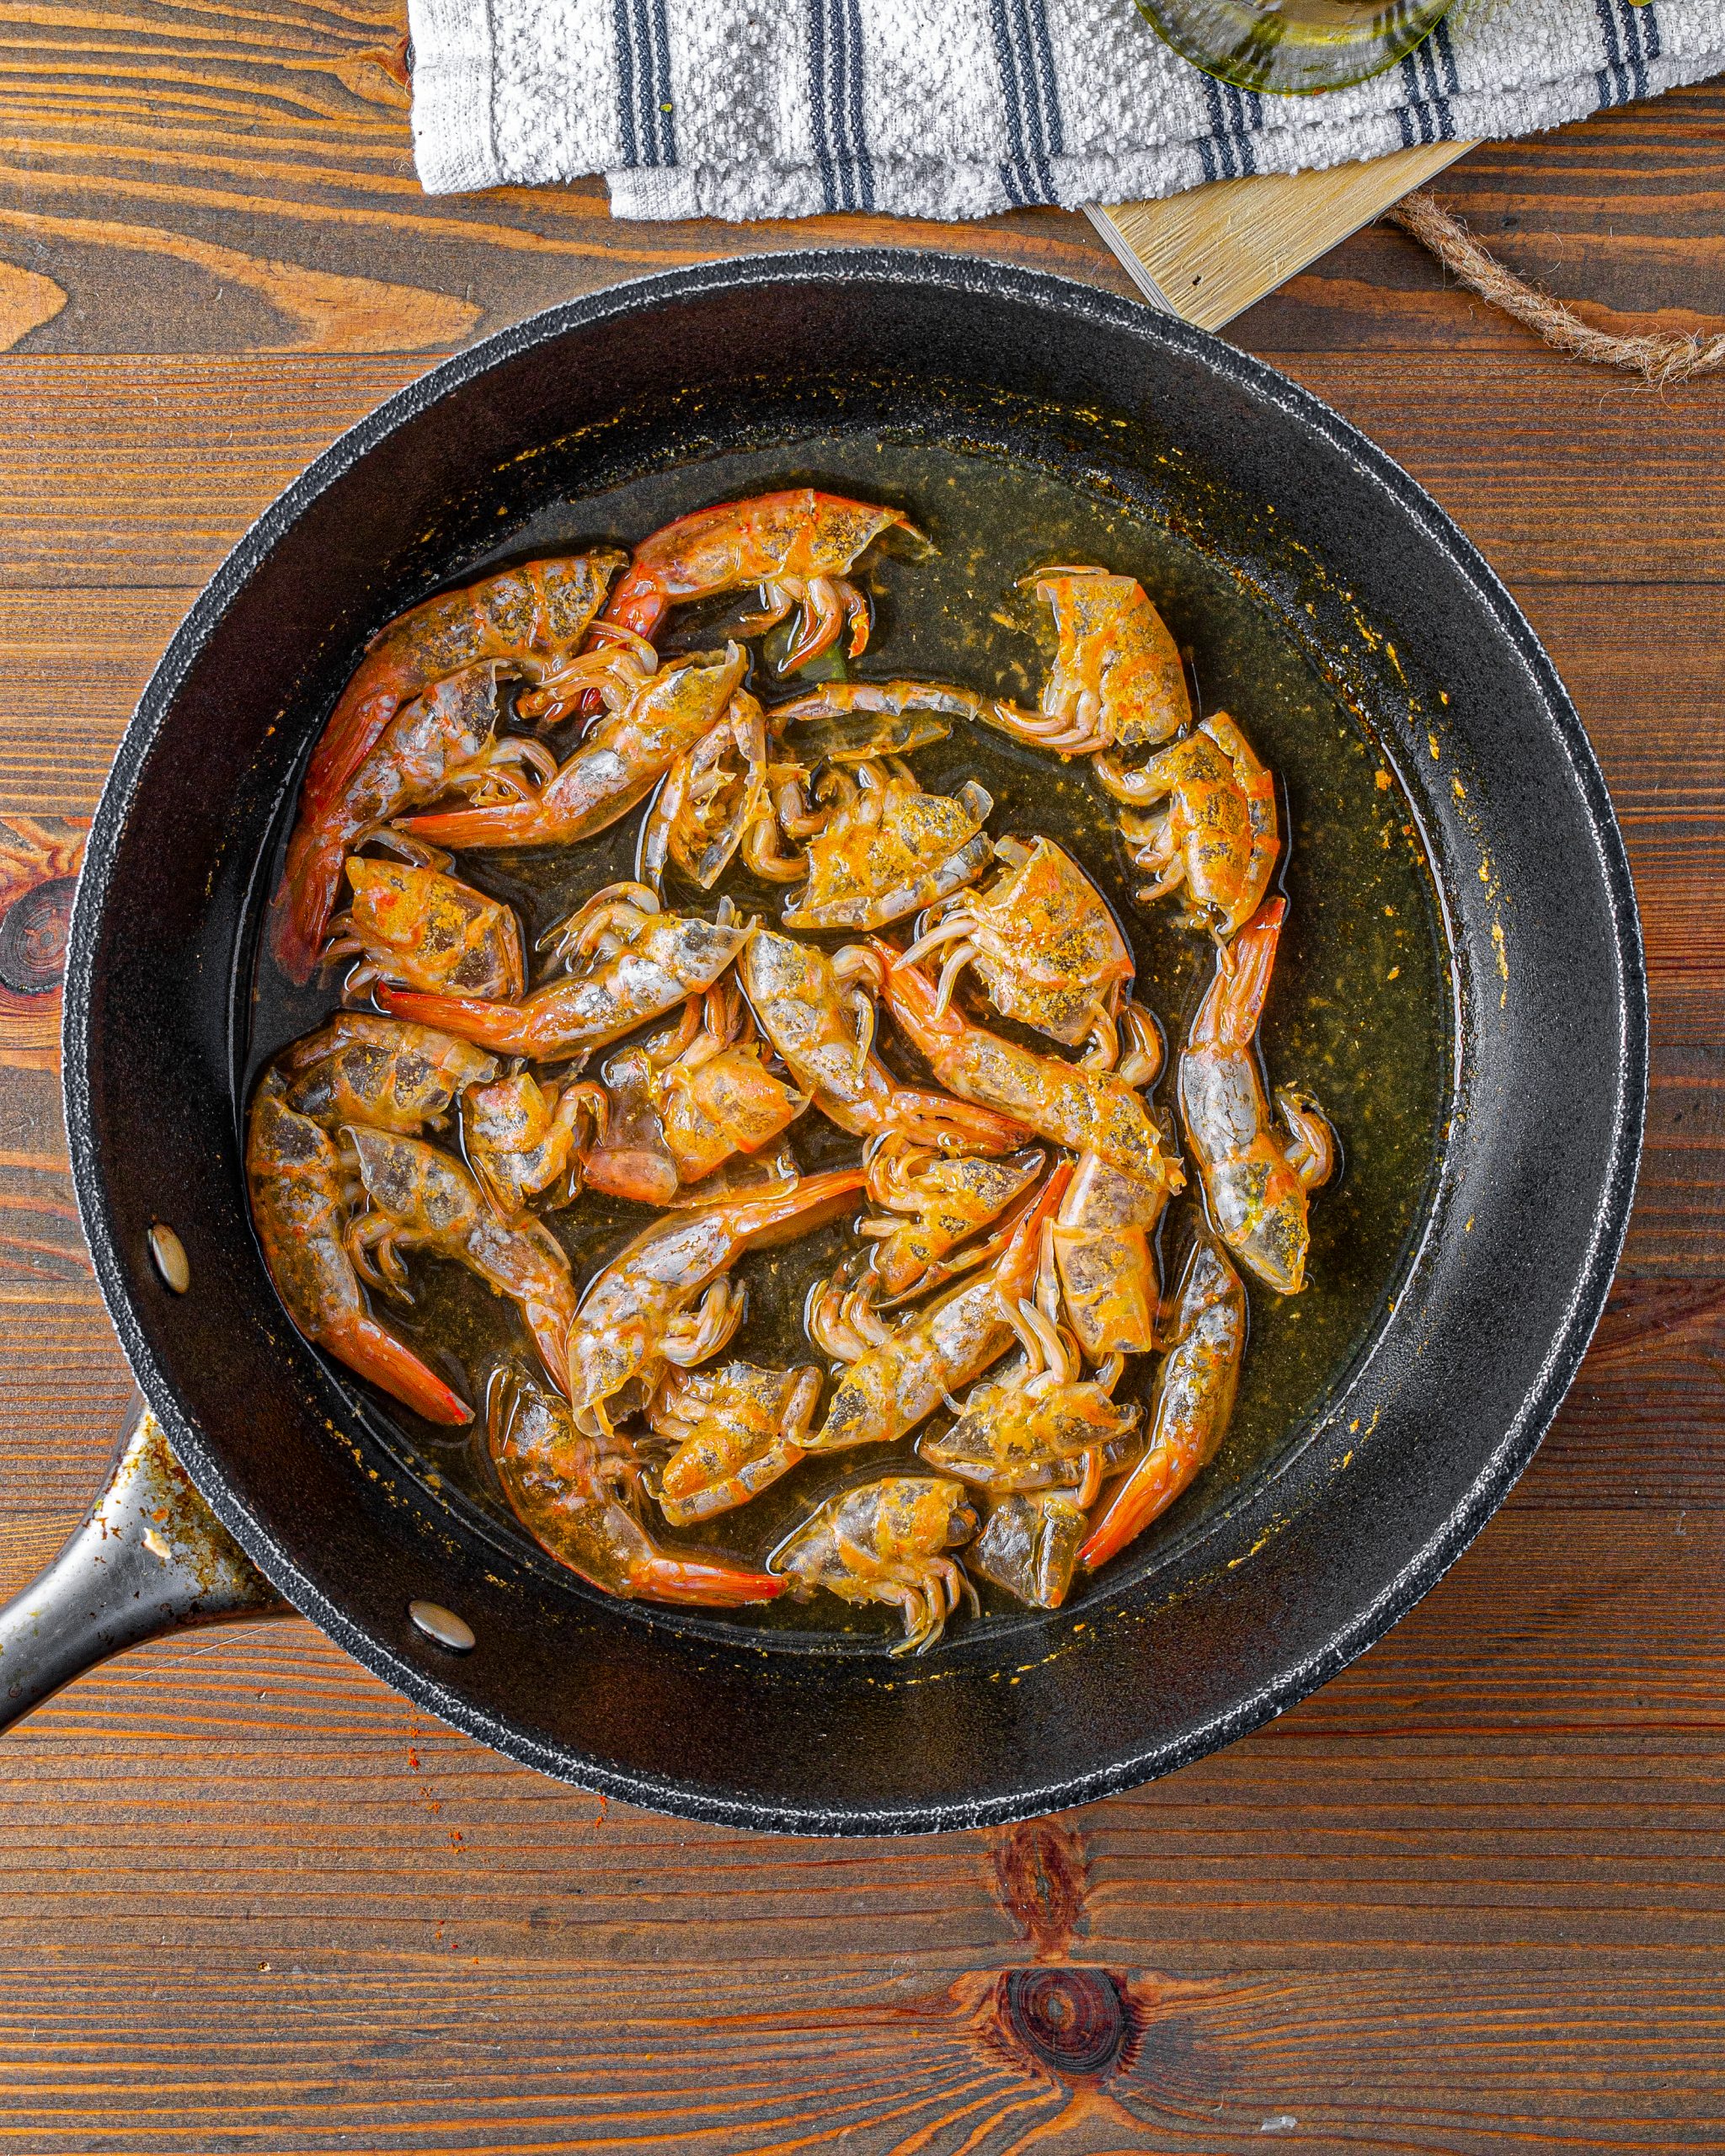 Place the shells from the shrimp into a pot of boiling water. Simmer the shells for 20 minutes, then remove them from the pot. 